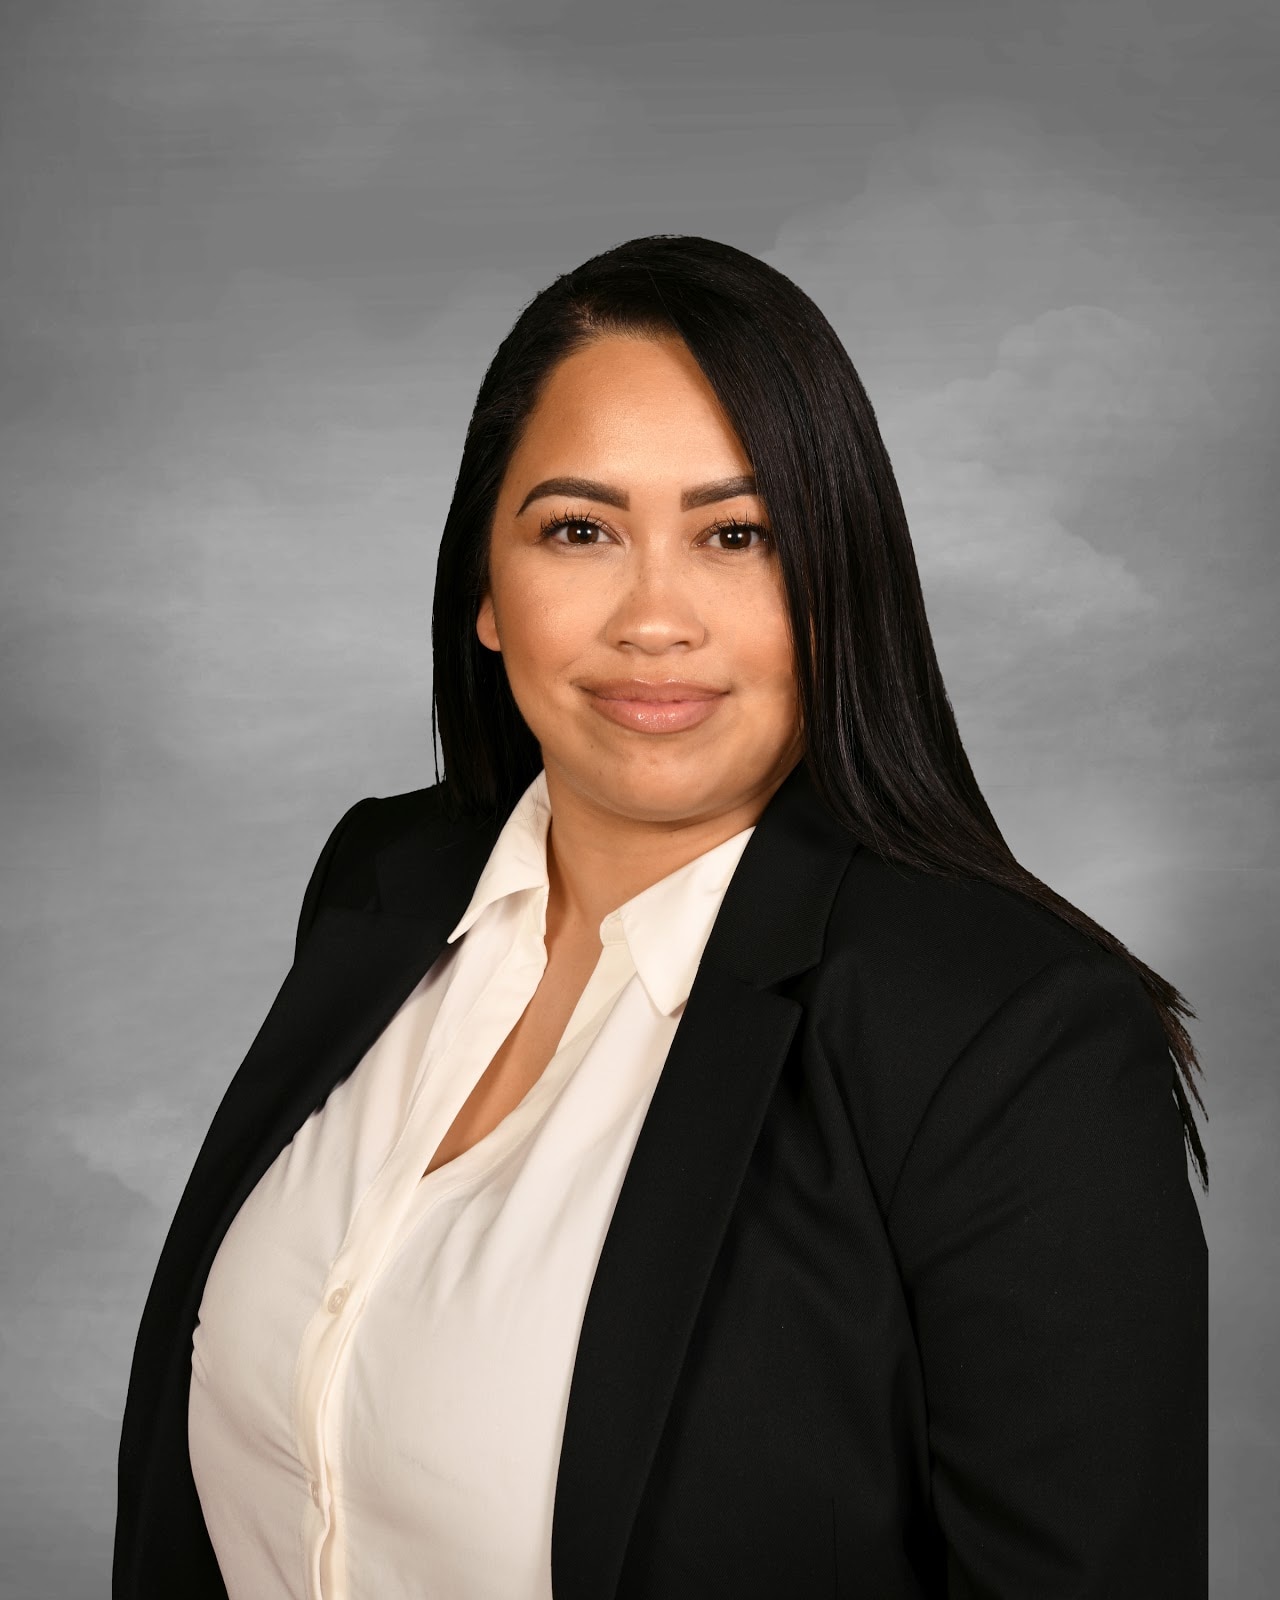 ADRIANA RODRIGUEZ  Your Financial Professional & Insurance Agent